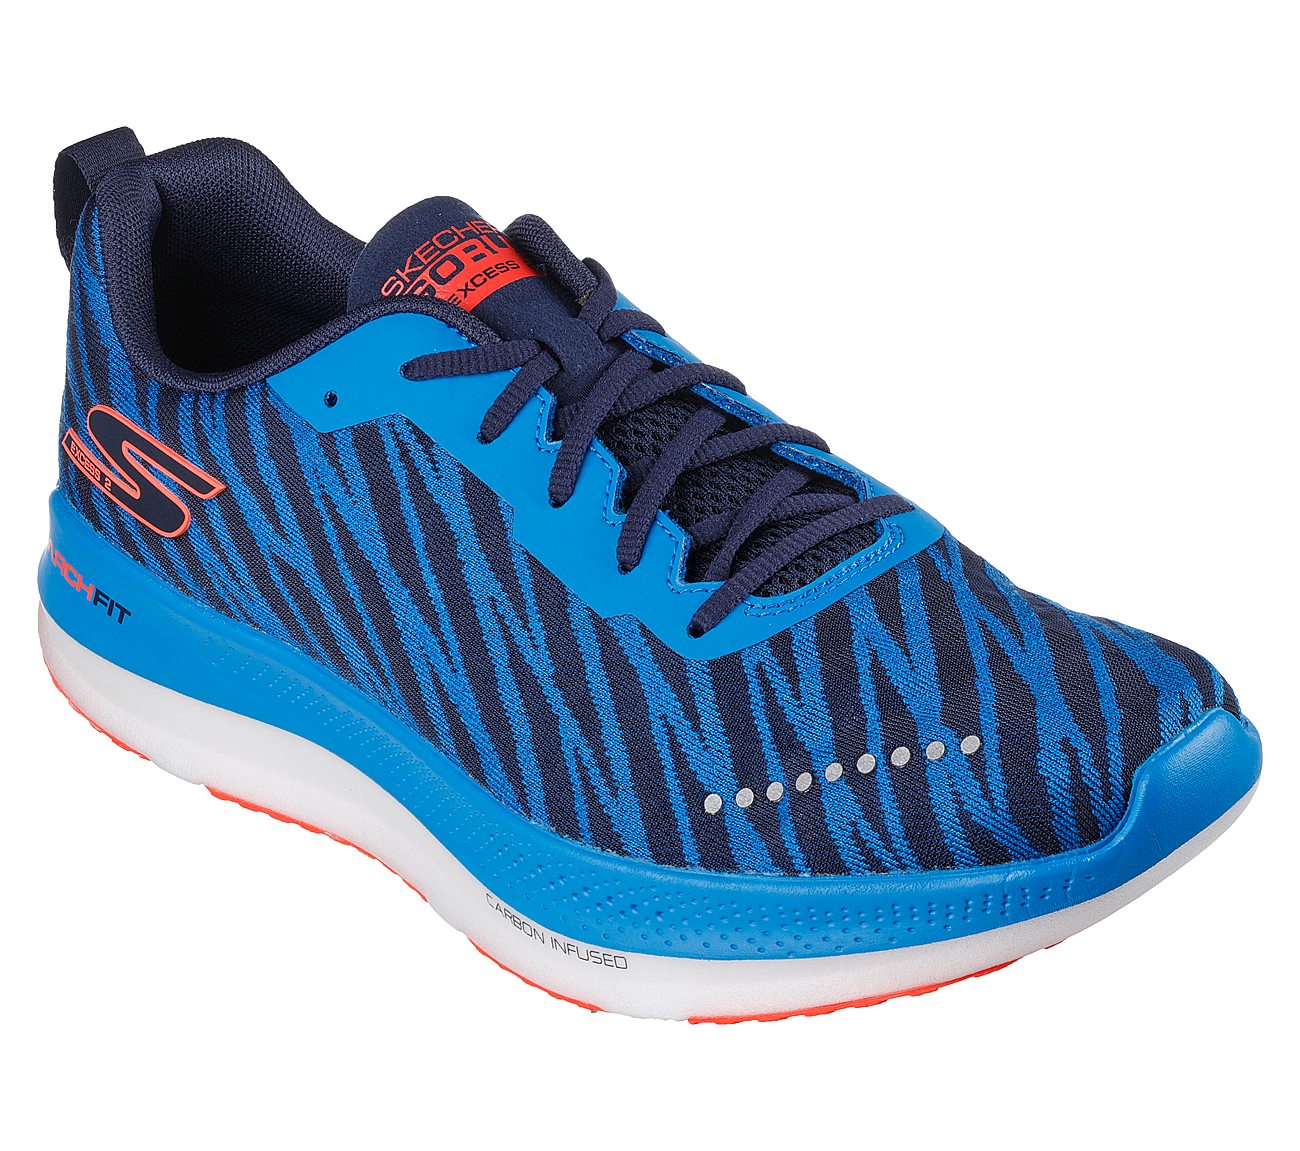 GO RUN RAZOR EXCESS 2, BLUE/NAVY Footwear Lateral View